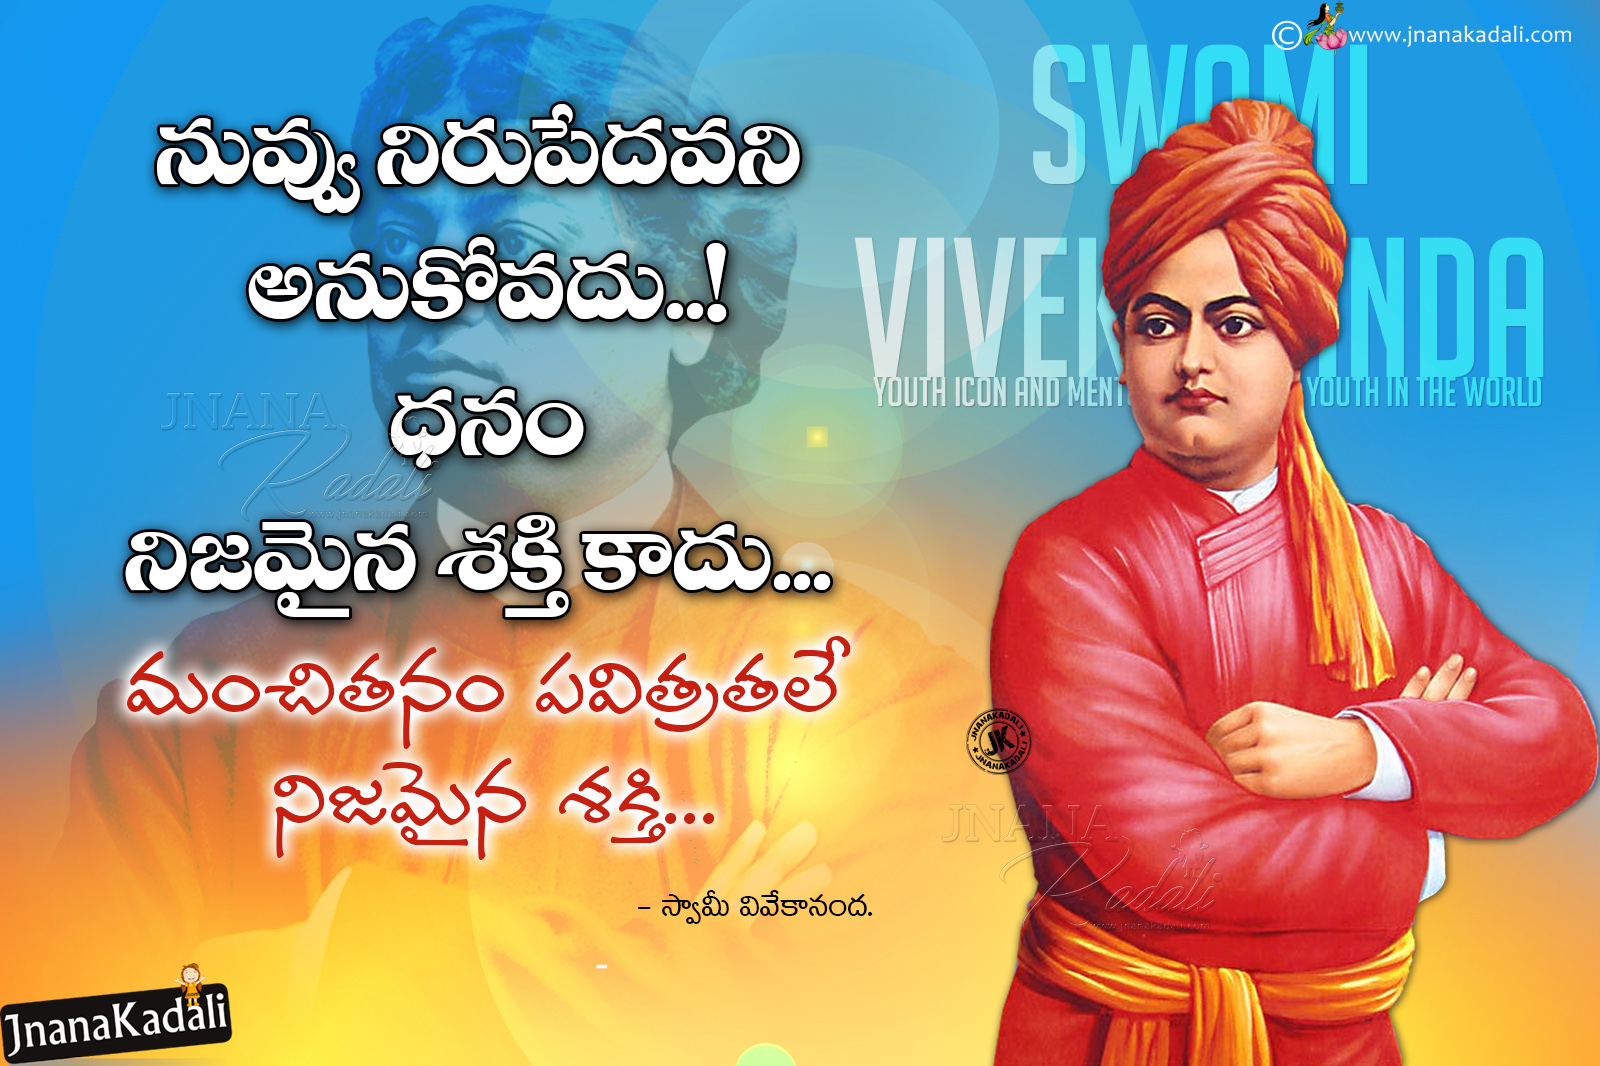 Swamy Vivekananada inspirational Quotes messages speeches In Telugu with  Vivekananda png hd images | JNANA  |Telugu Quotes|English  quotes|Hindi quotes|Tamil quotes|Dharmasandehalu|